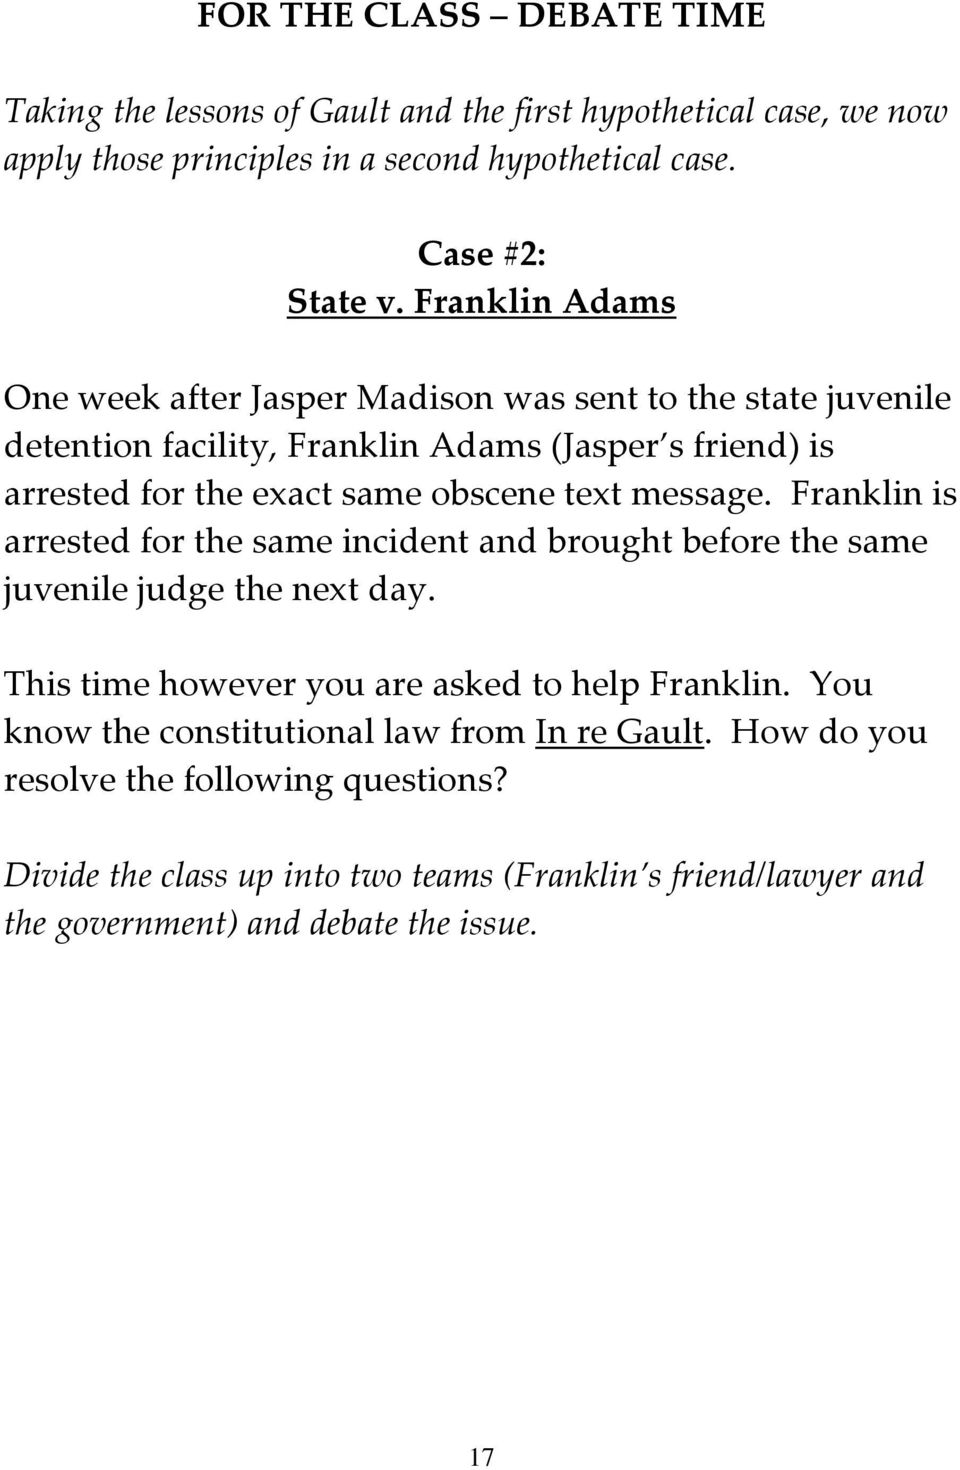 message. Franklin is arrested for the same incident and brought before the same juvenile judge the next day. This time however you are asked to help Franklin.